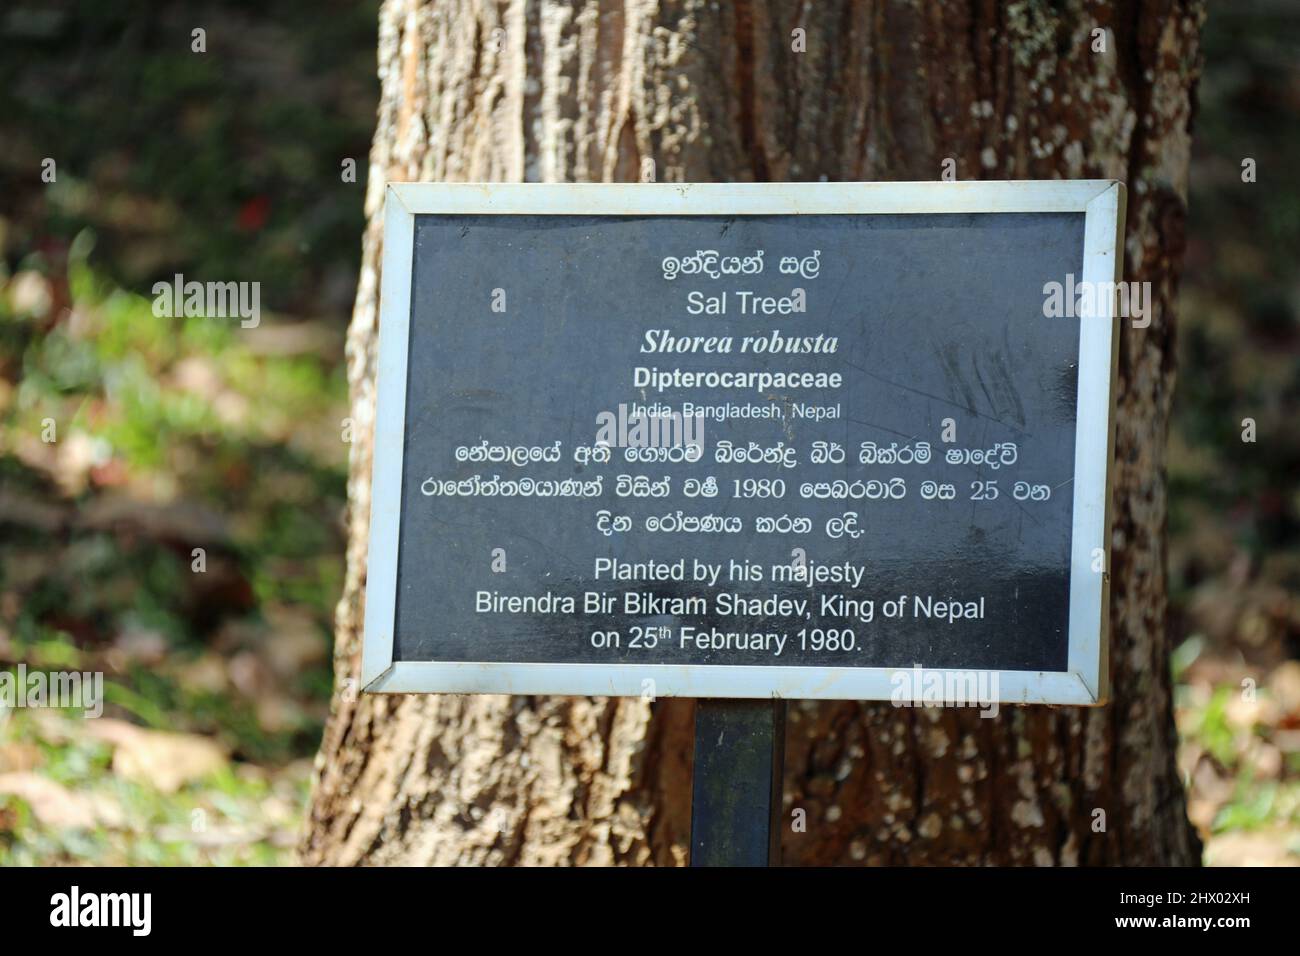 Sal tree planted in Sri Lanka by the King of Nepal in 1980 Stock Photo